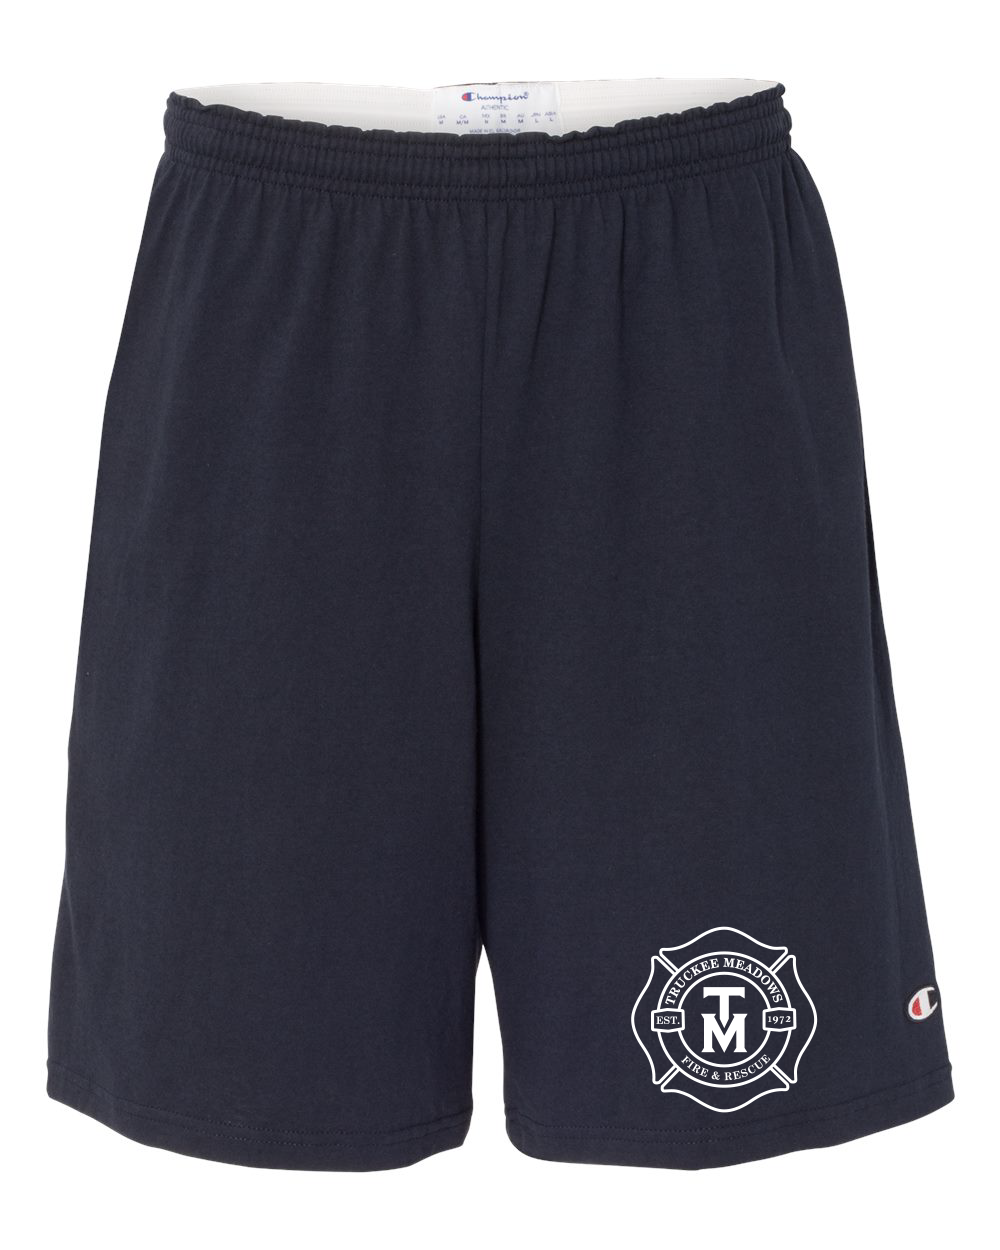 Truckee Meadows Champion Duty Workout Shorts